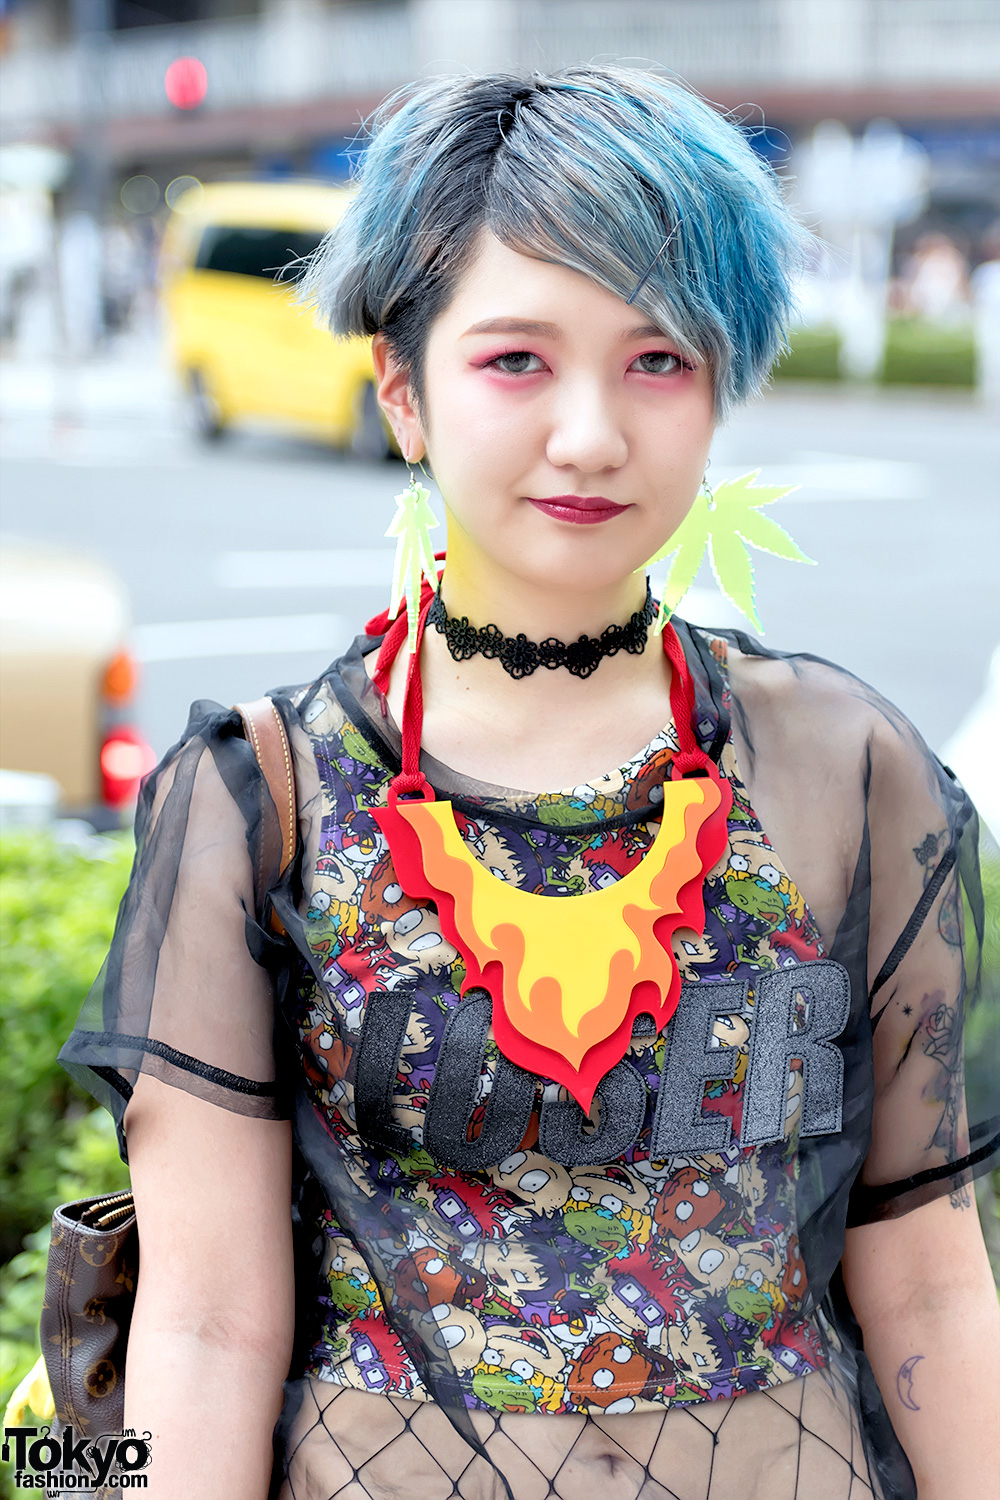 Harajuku Girl in Ripped Jeans Over Fishnets, Flame Necklace & Platforms ...